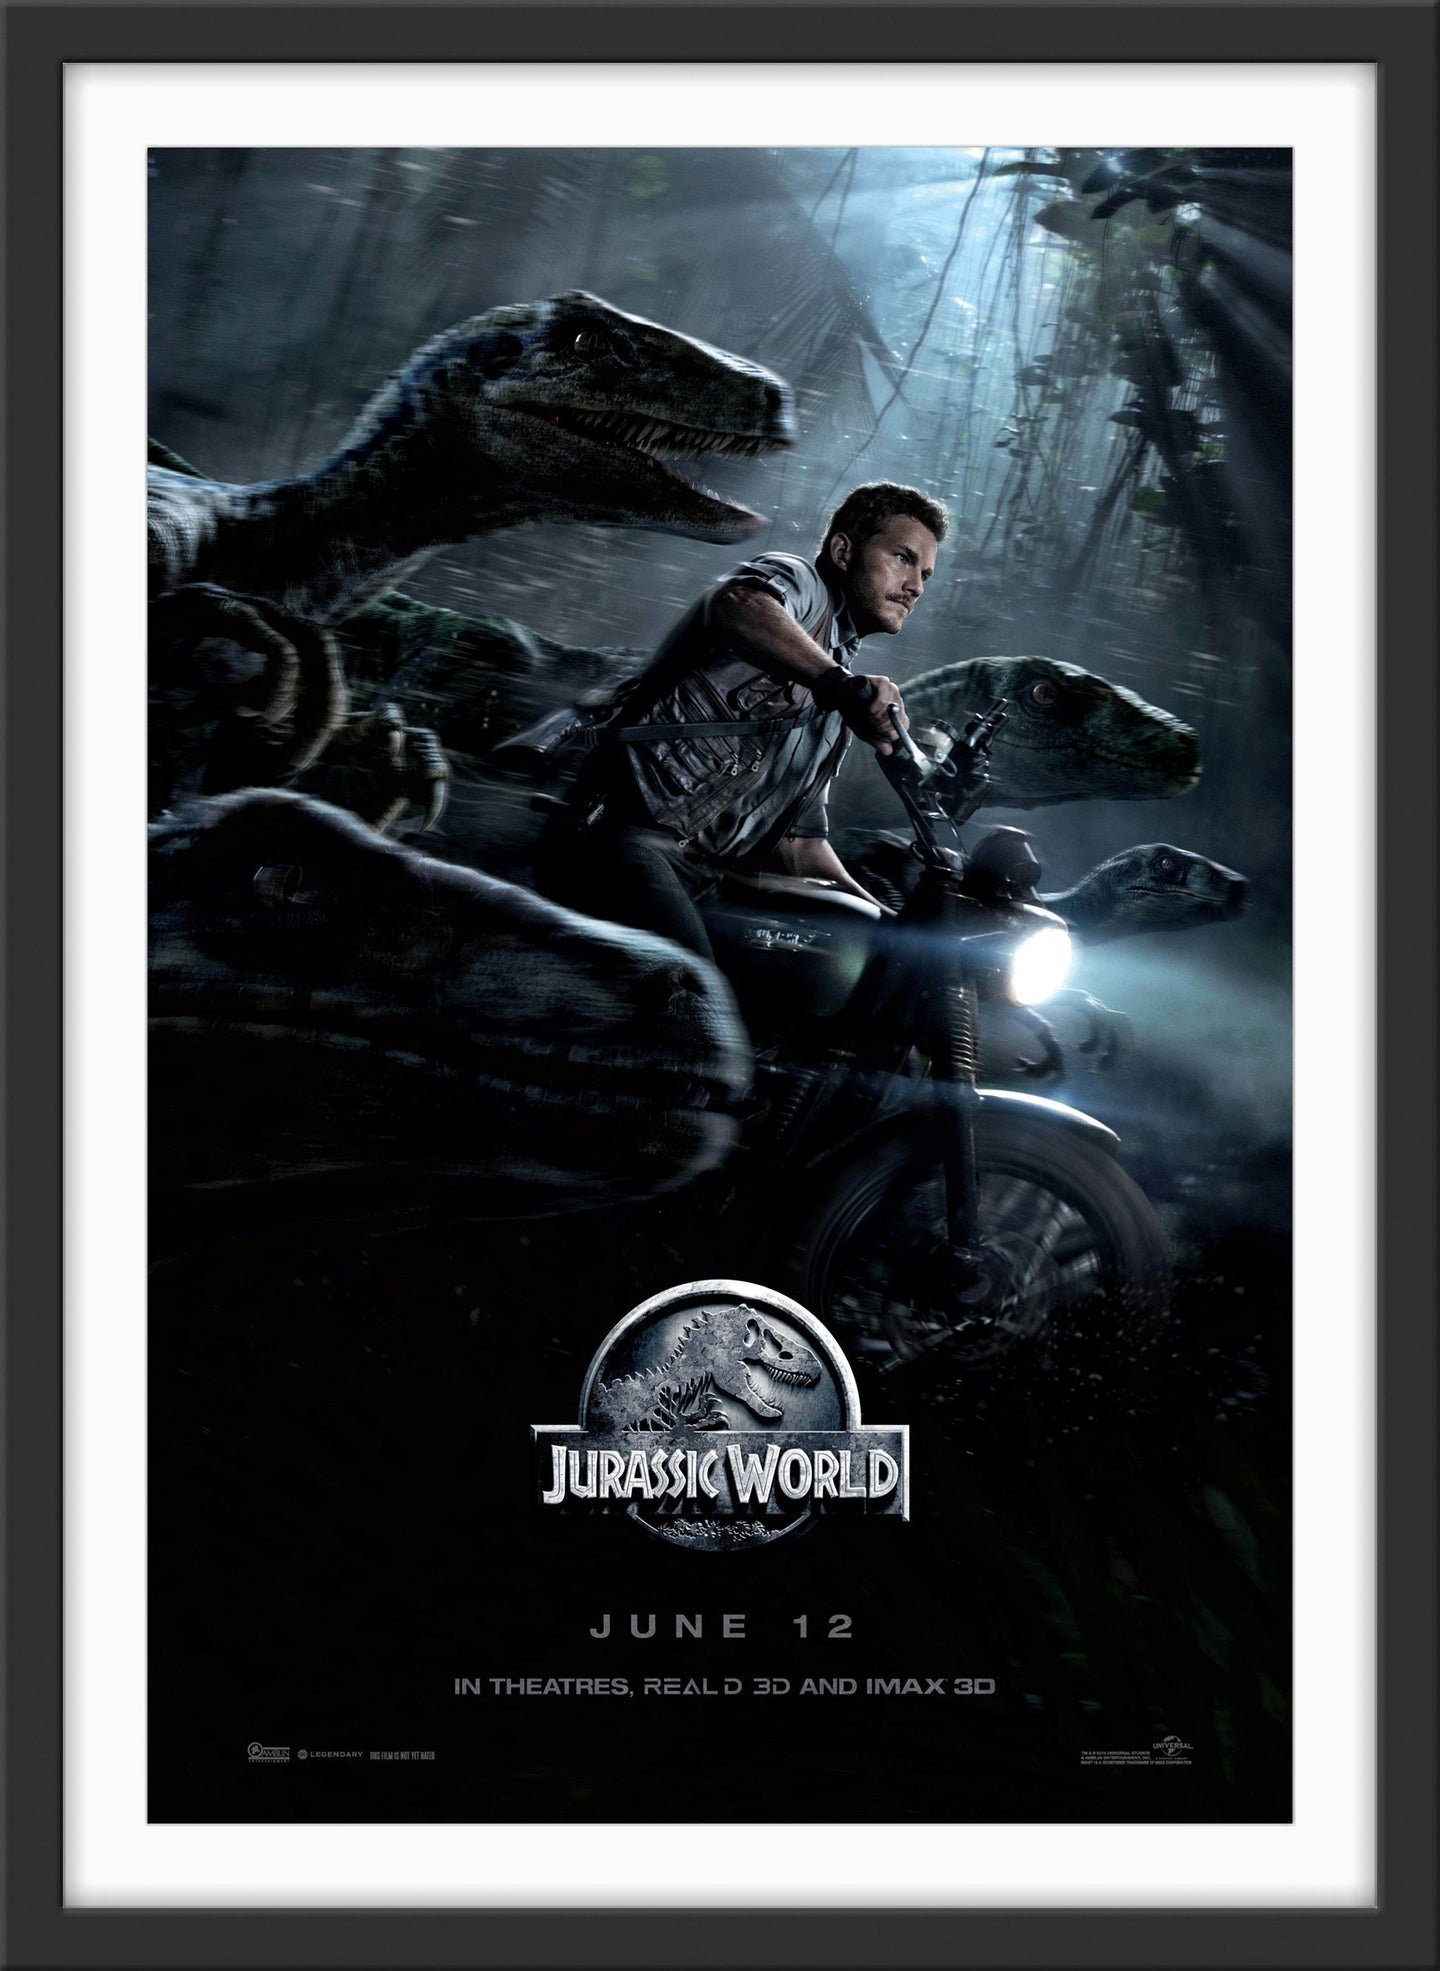 An original movie poster for the film Jurassic World